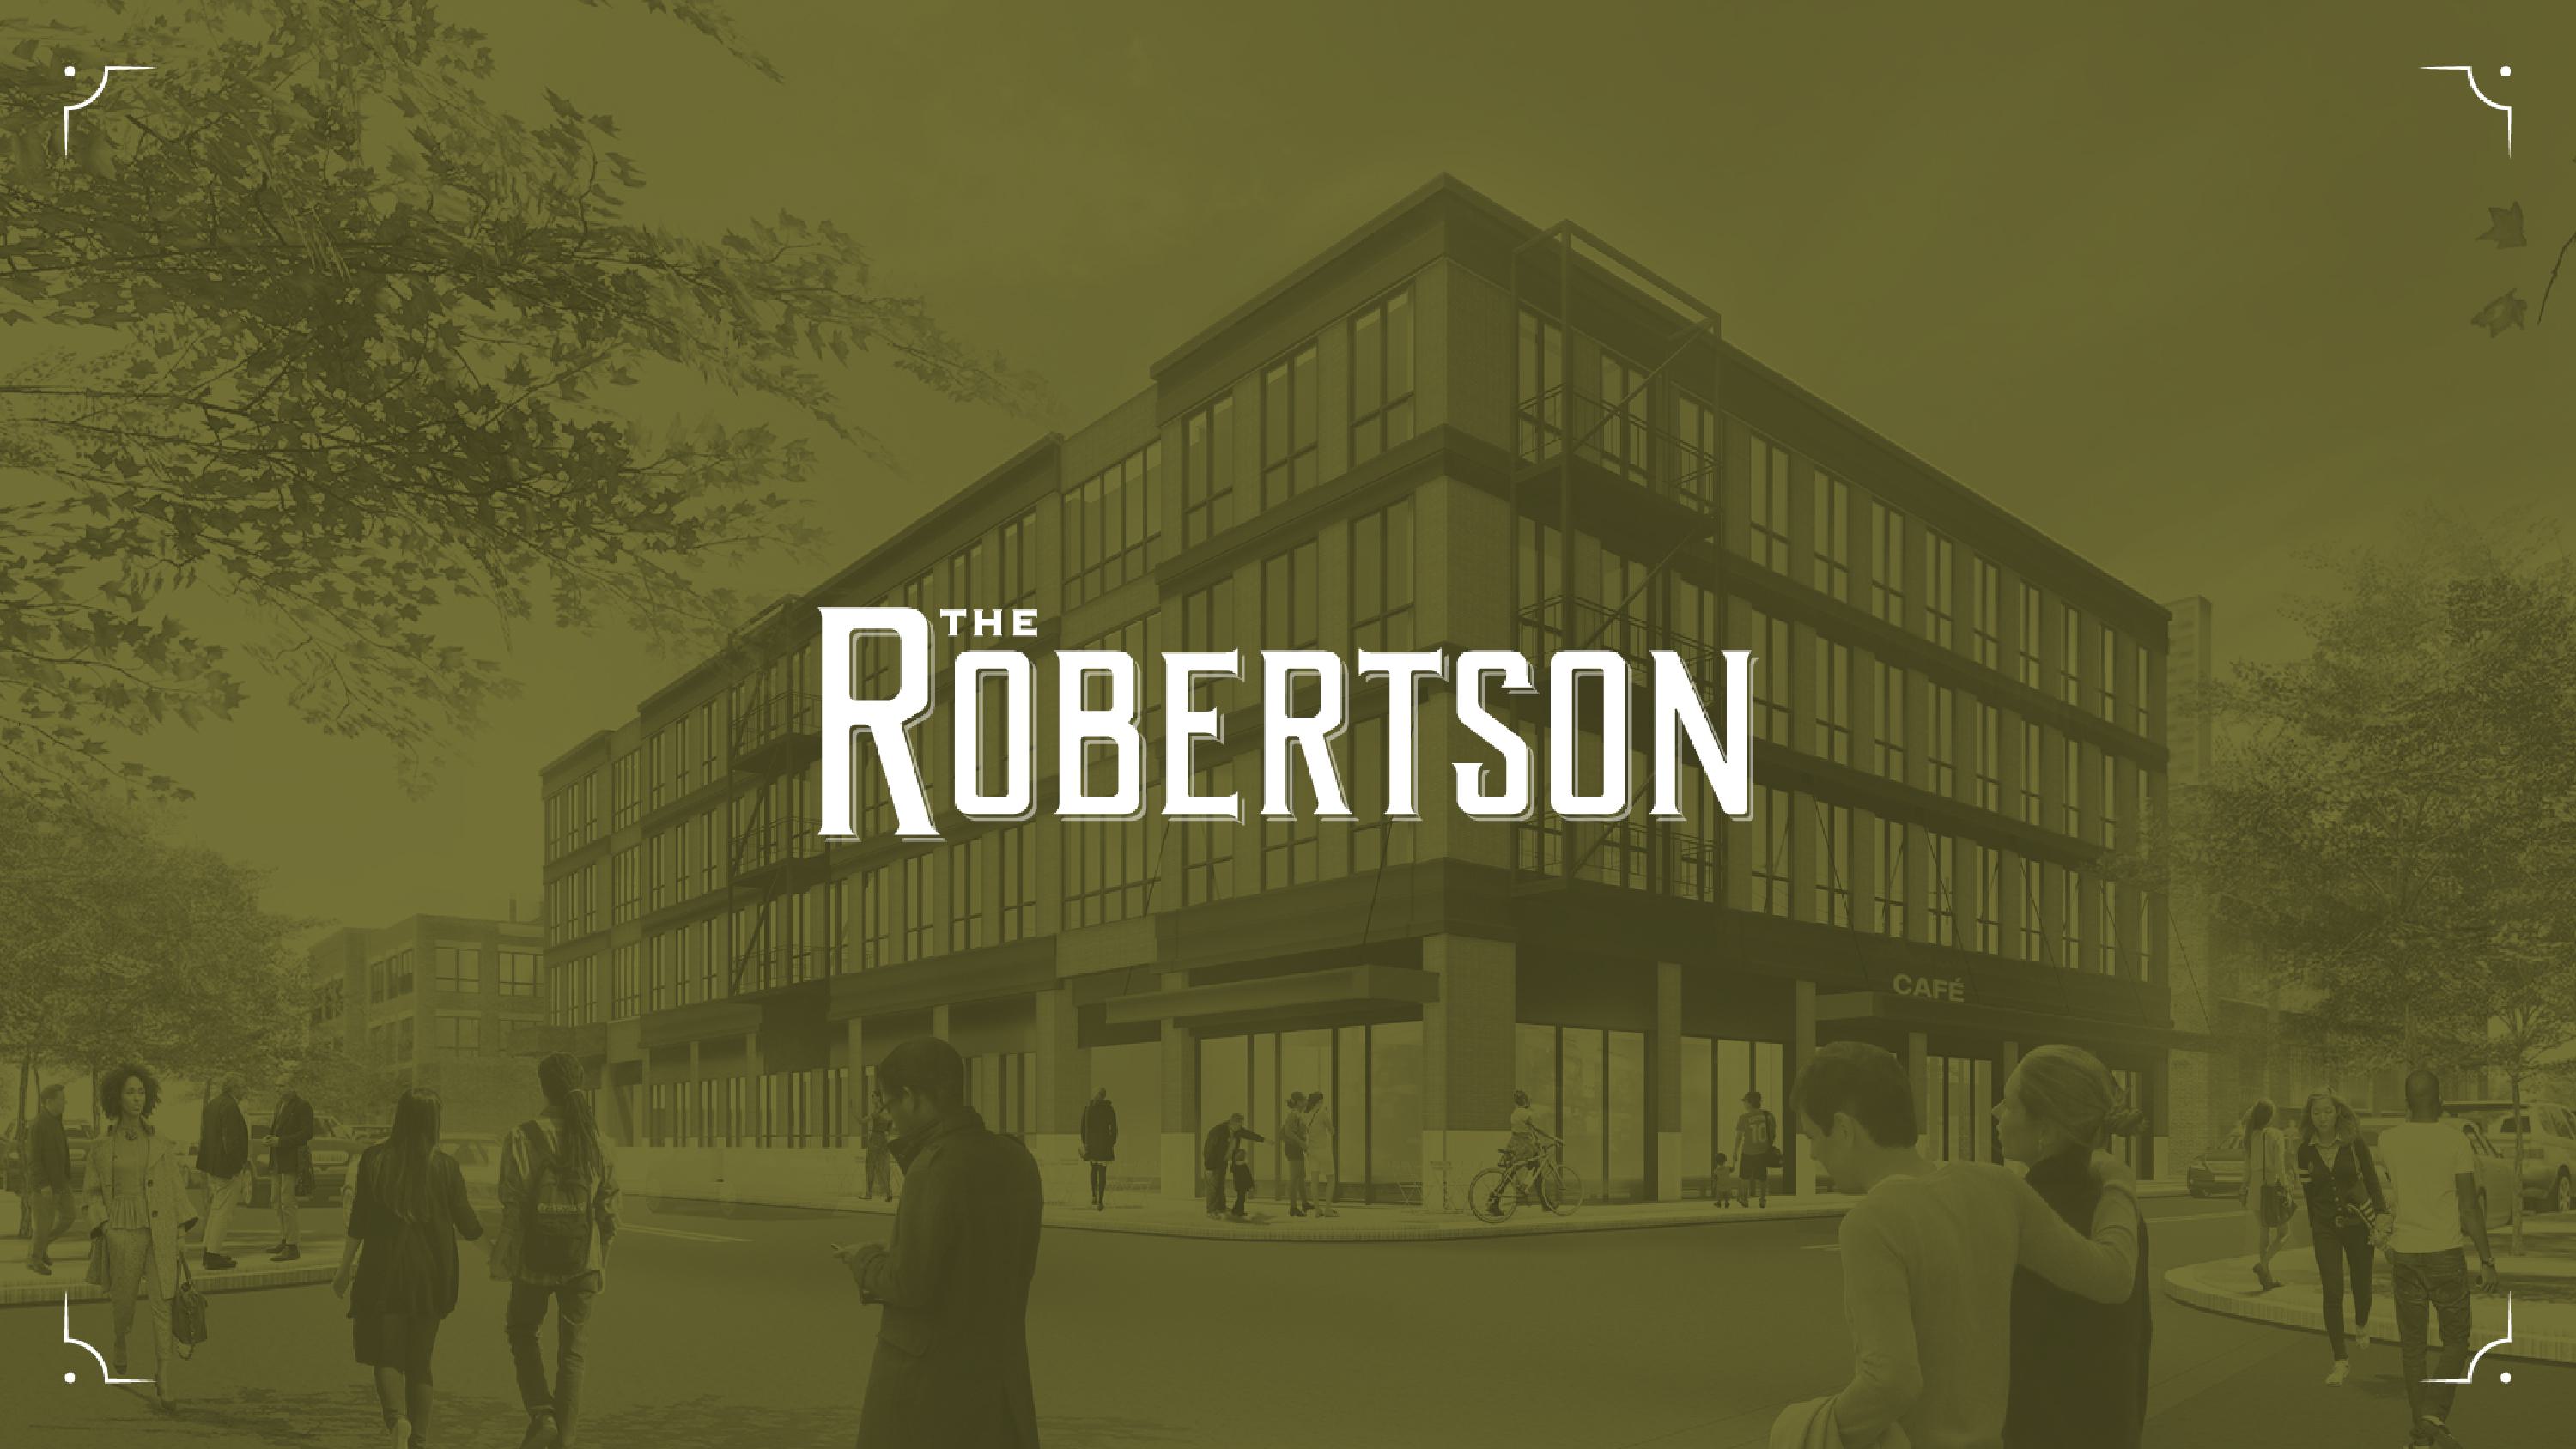 The Robertson wordmark against a stylized photo of the building